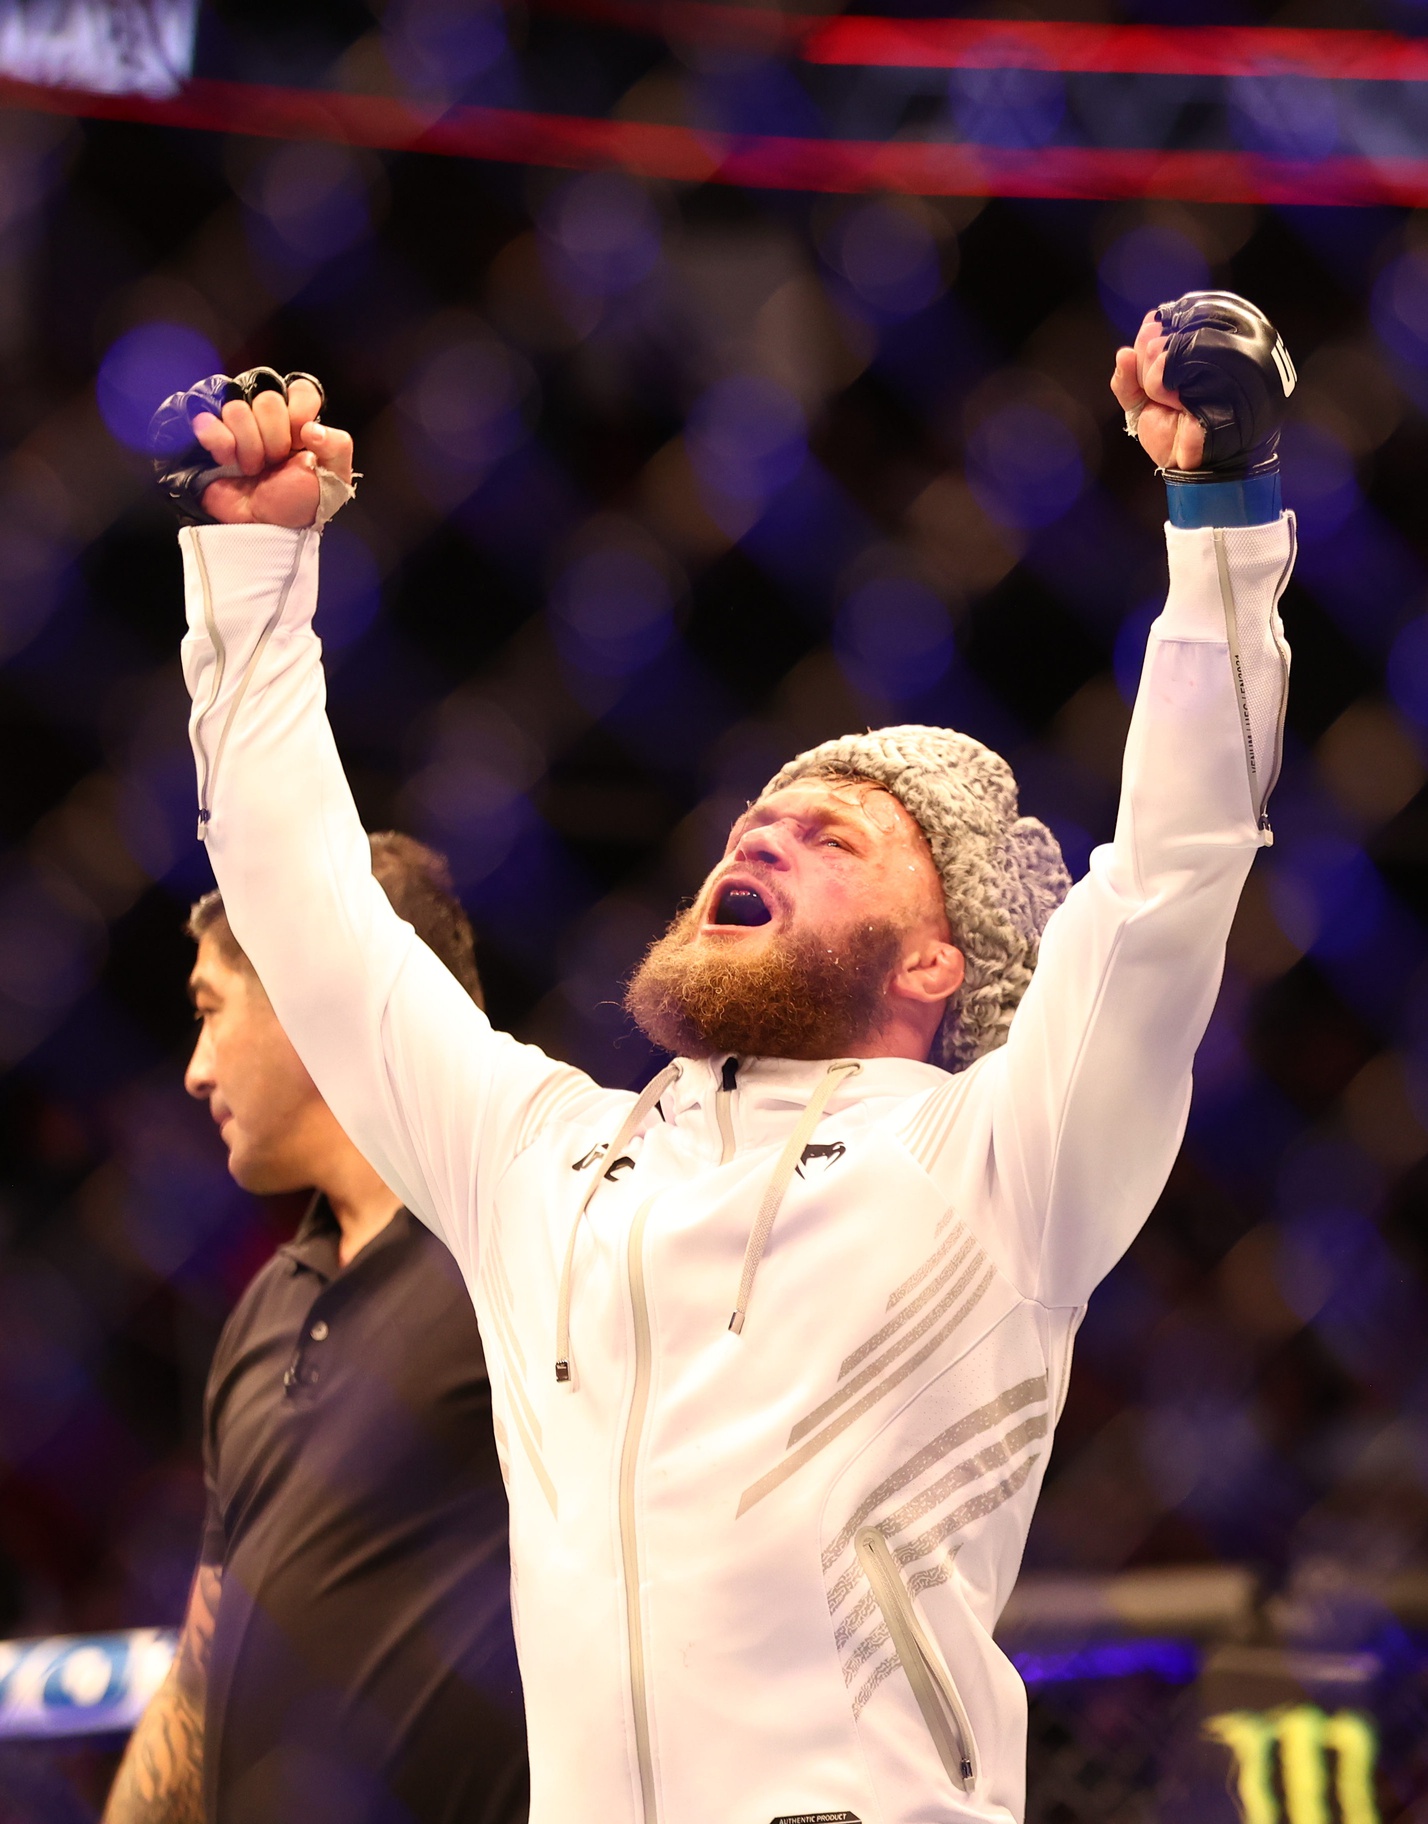 https://thesportsdaily.com/2022/01/03/ufc-performance-based-fighter-rankings-welterweights-jan-3-22-fox11/